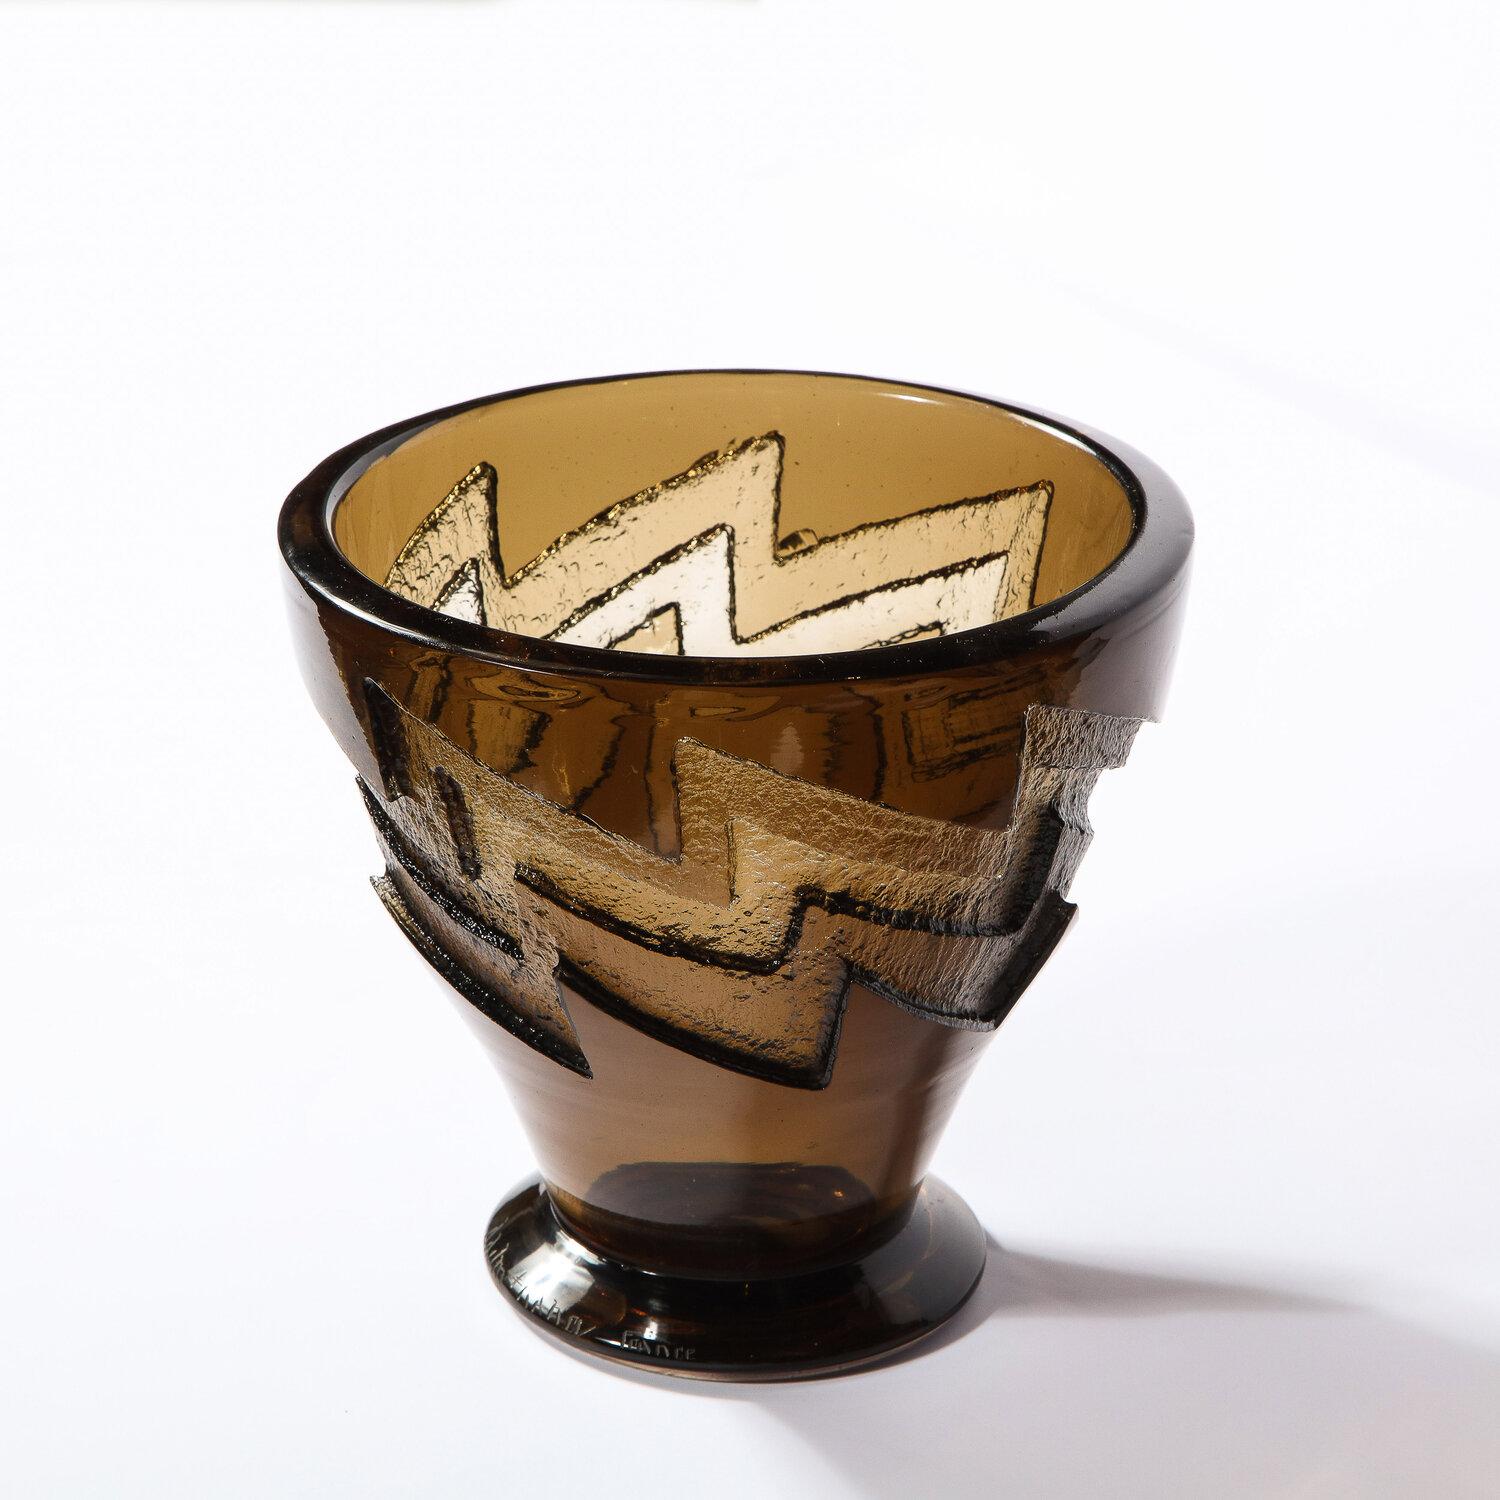 This refined Art Deco vase was realized and signed Daum Nancy in France, circa 1930. Handblown in textural molded glass, it offers a tapered conical body with a round cantilevered base and circular mouth in a rich smoked sable hue. A graphic and